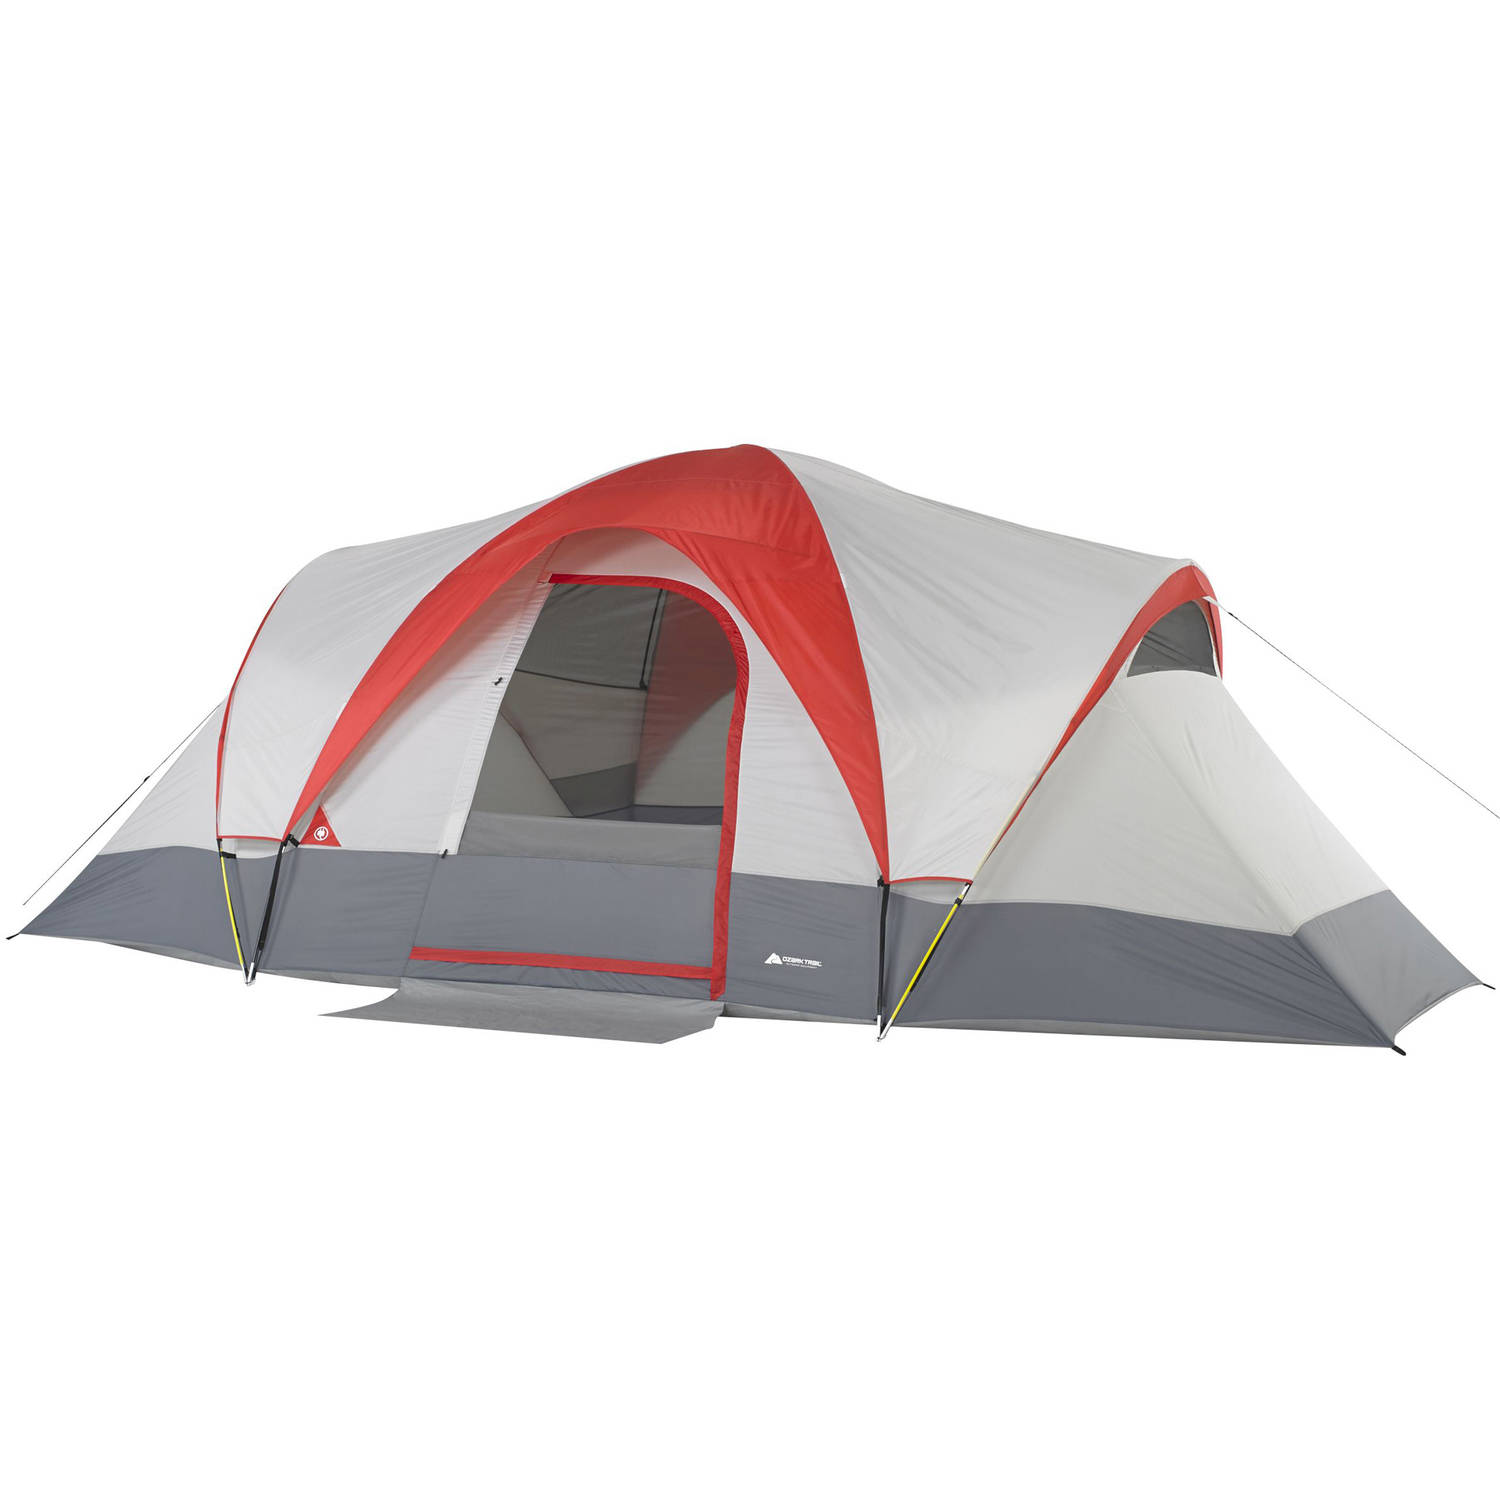 Ozark Trail Weatherbuster 9 Person Dome Tent with Two Queen Airbeds - 18' x 10' - 22.48lbs. - image 3 of 3